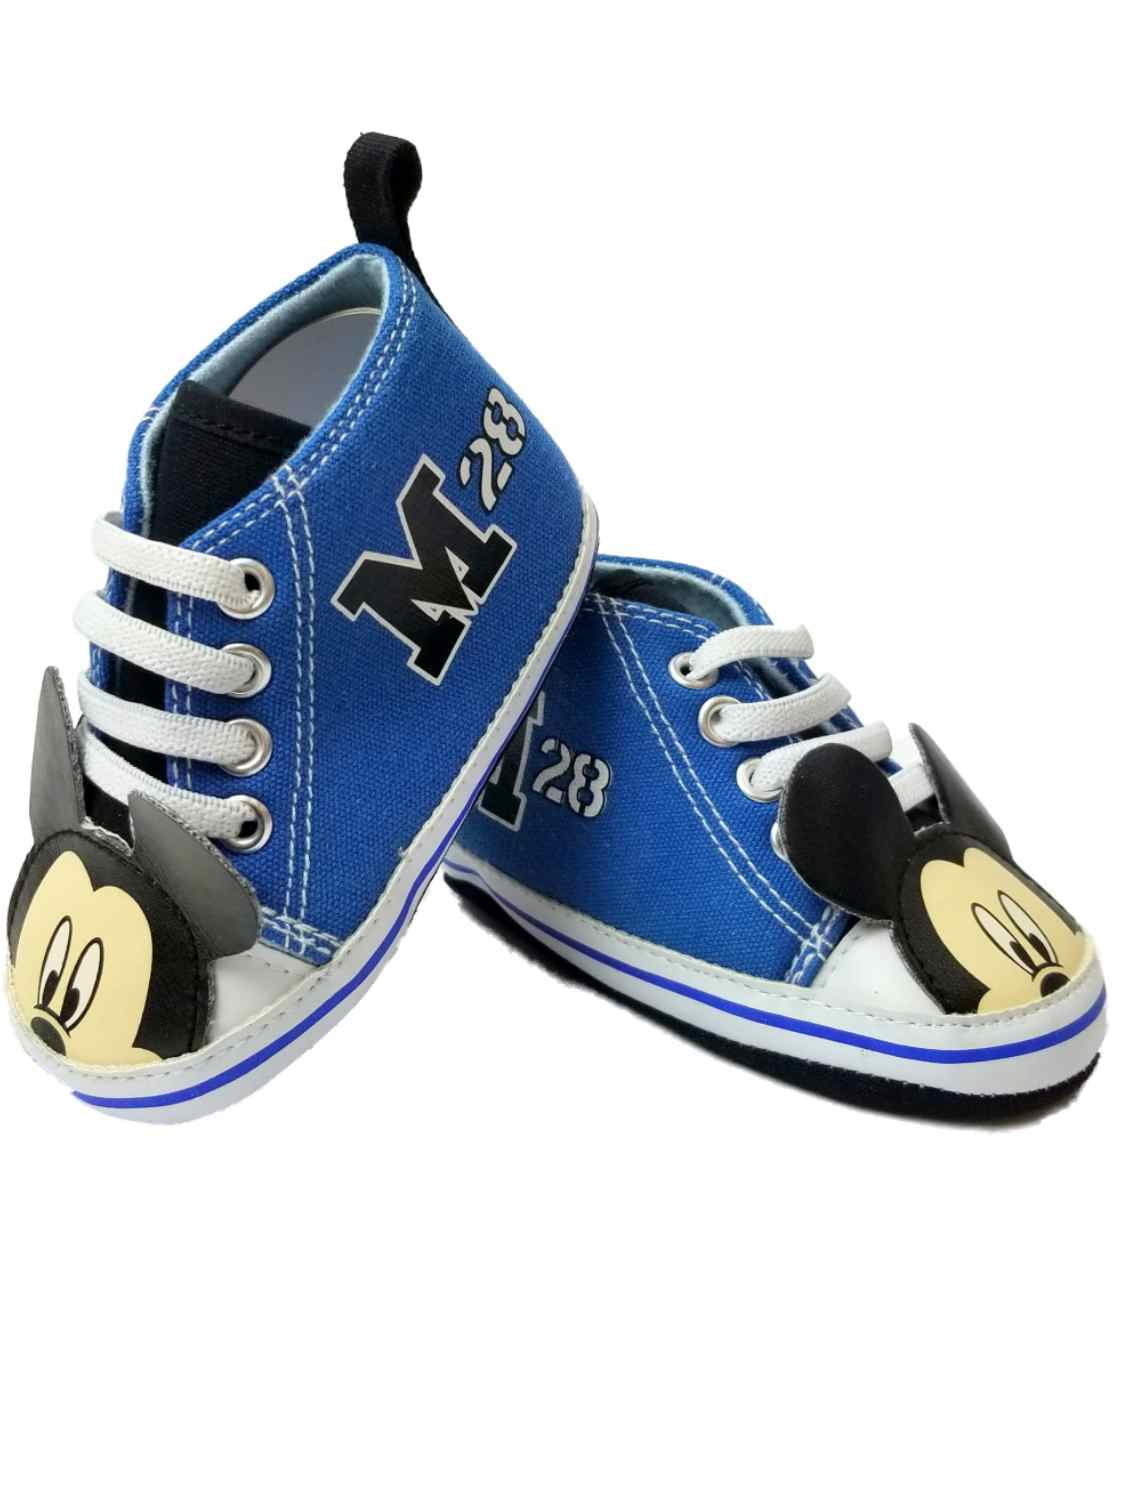 boys character shoes